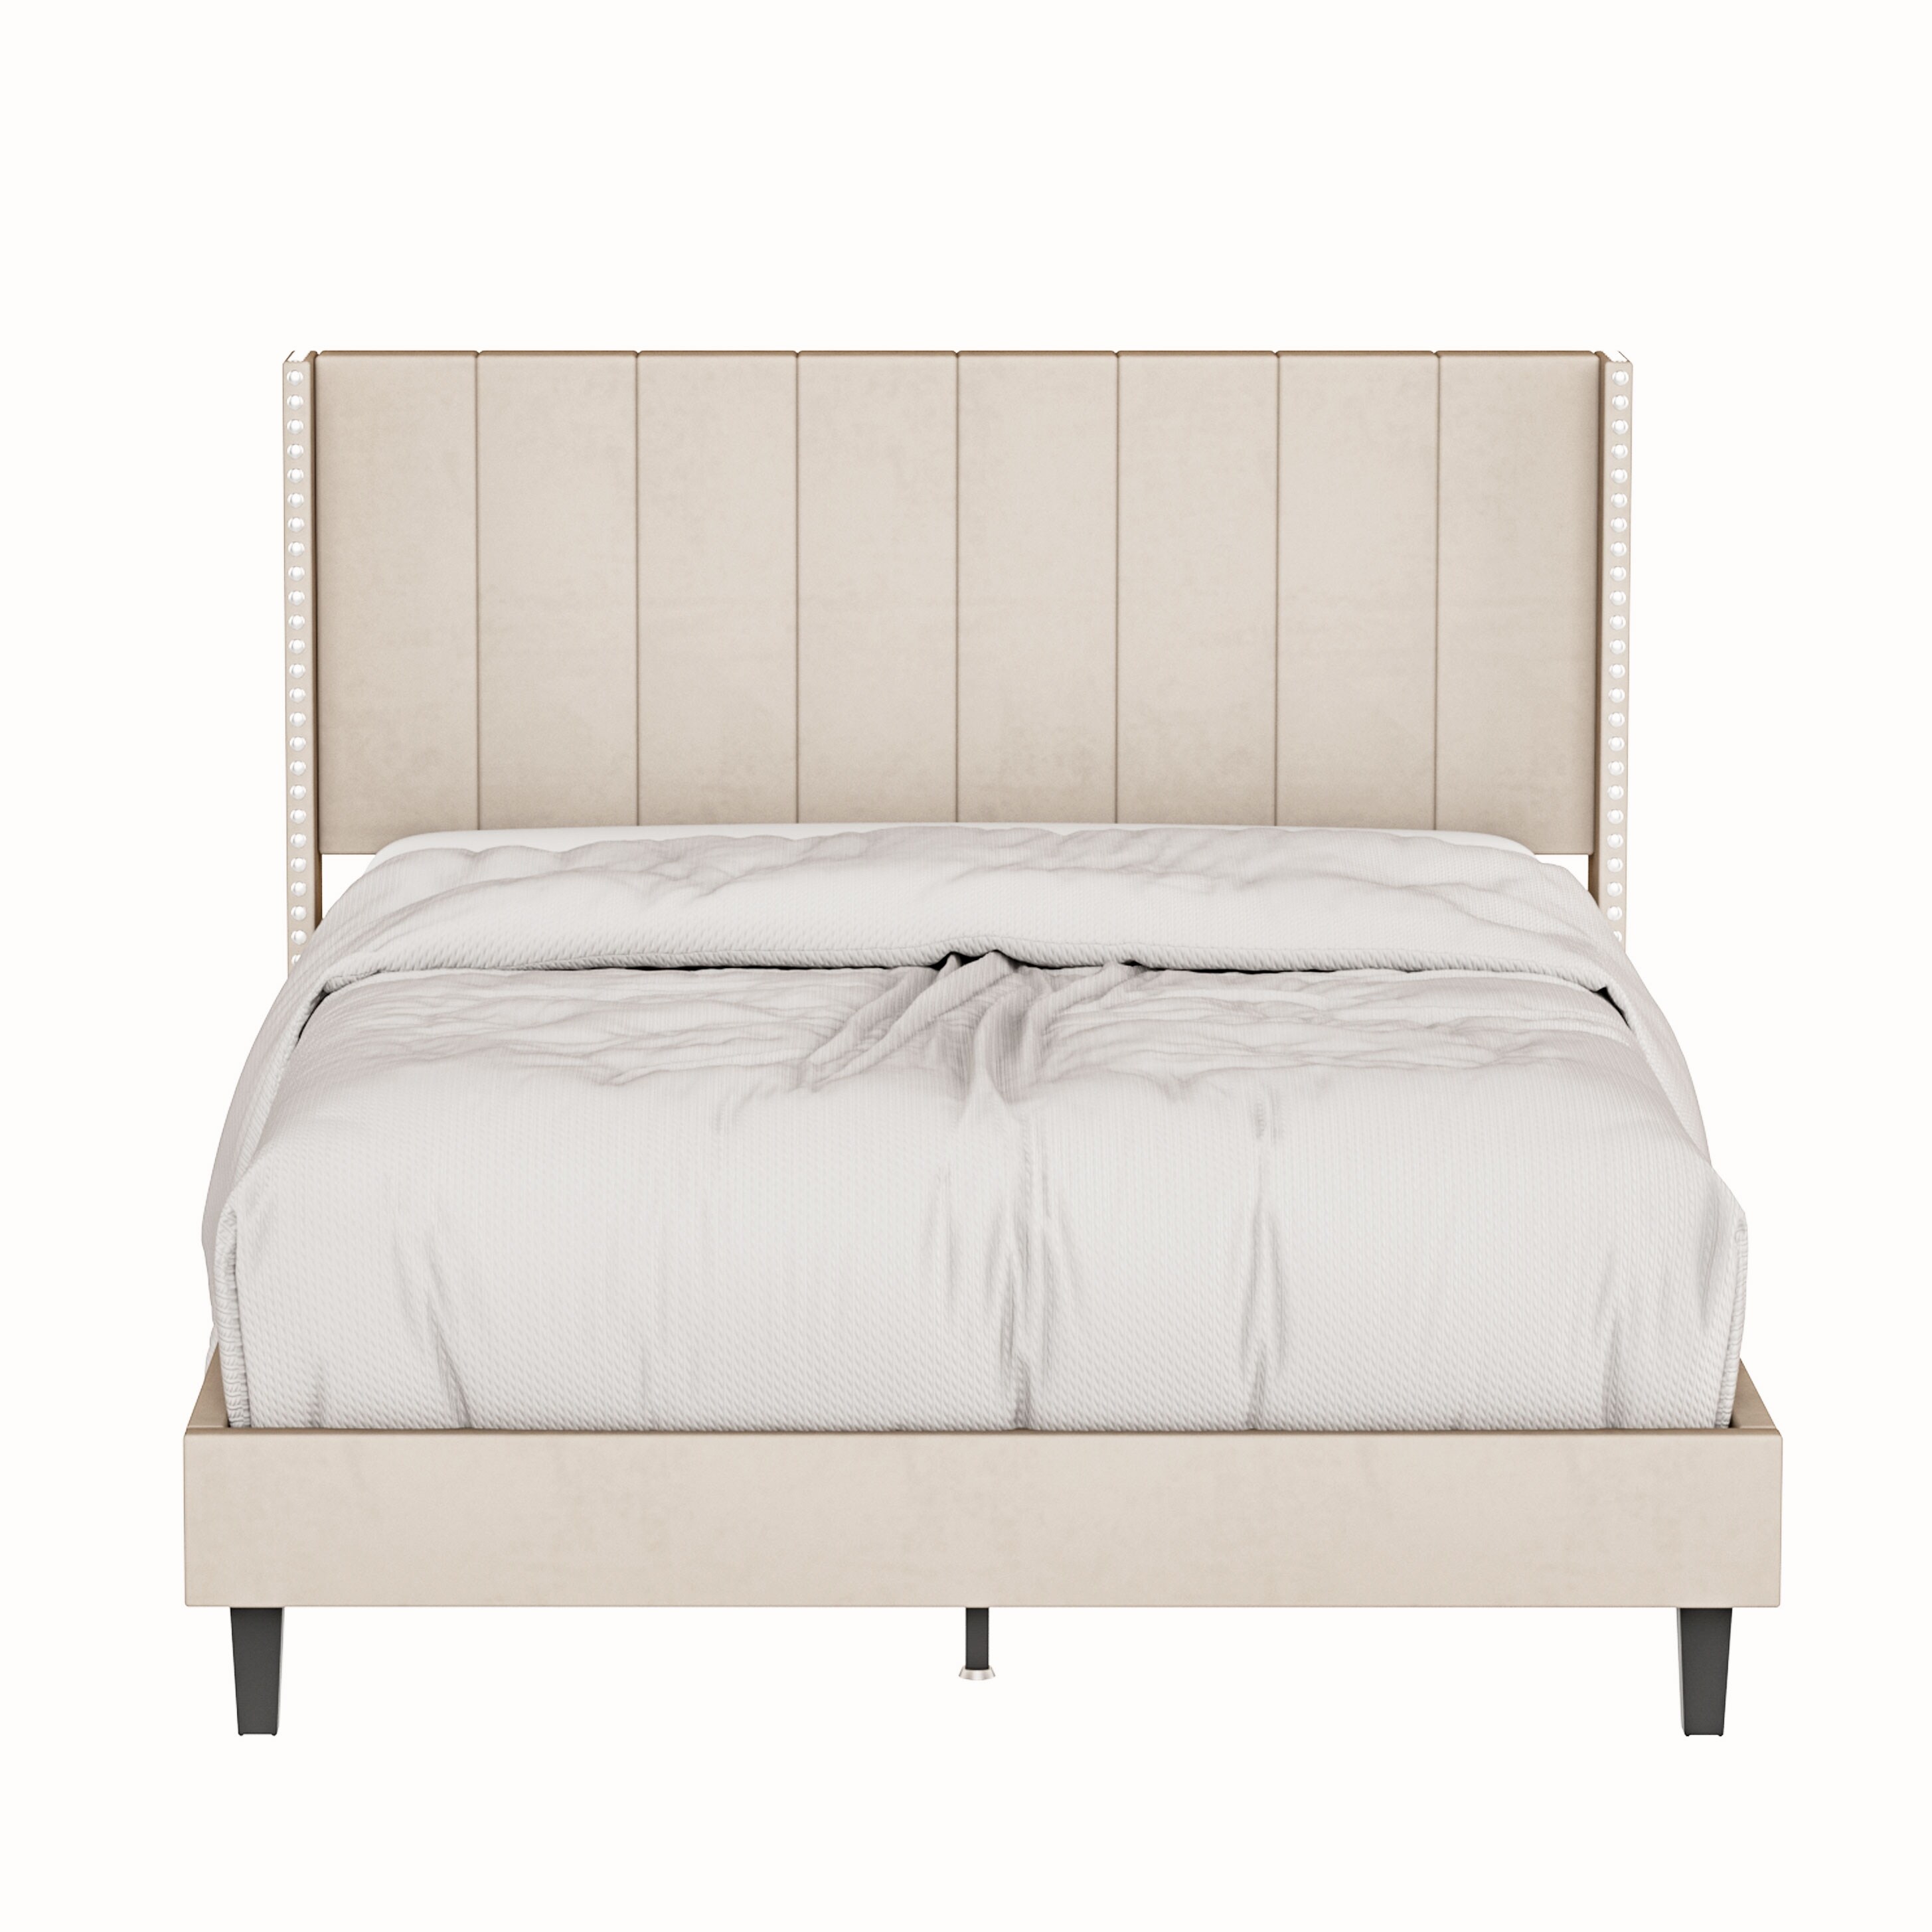 Queen Size Tufted Upholstered Bed Frame Low Profile Velvet Bed Frame Platform with Raised Wingback Headboard